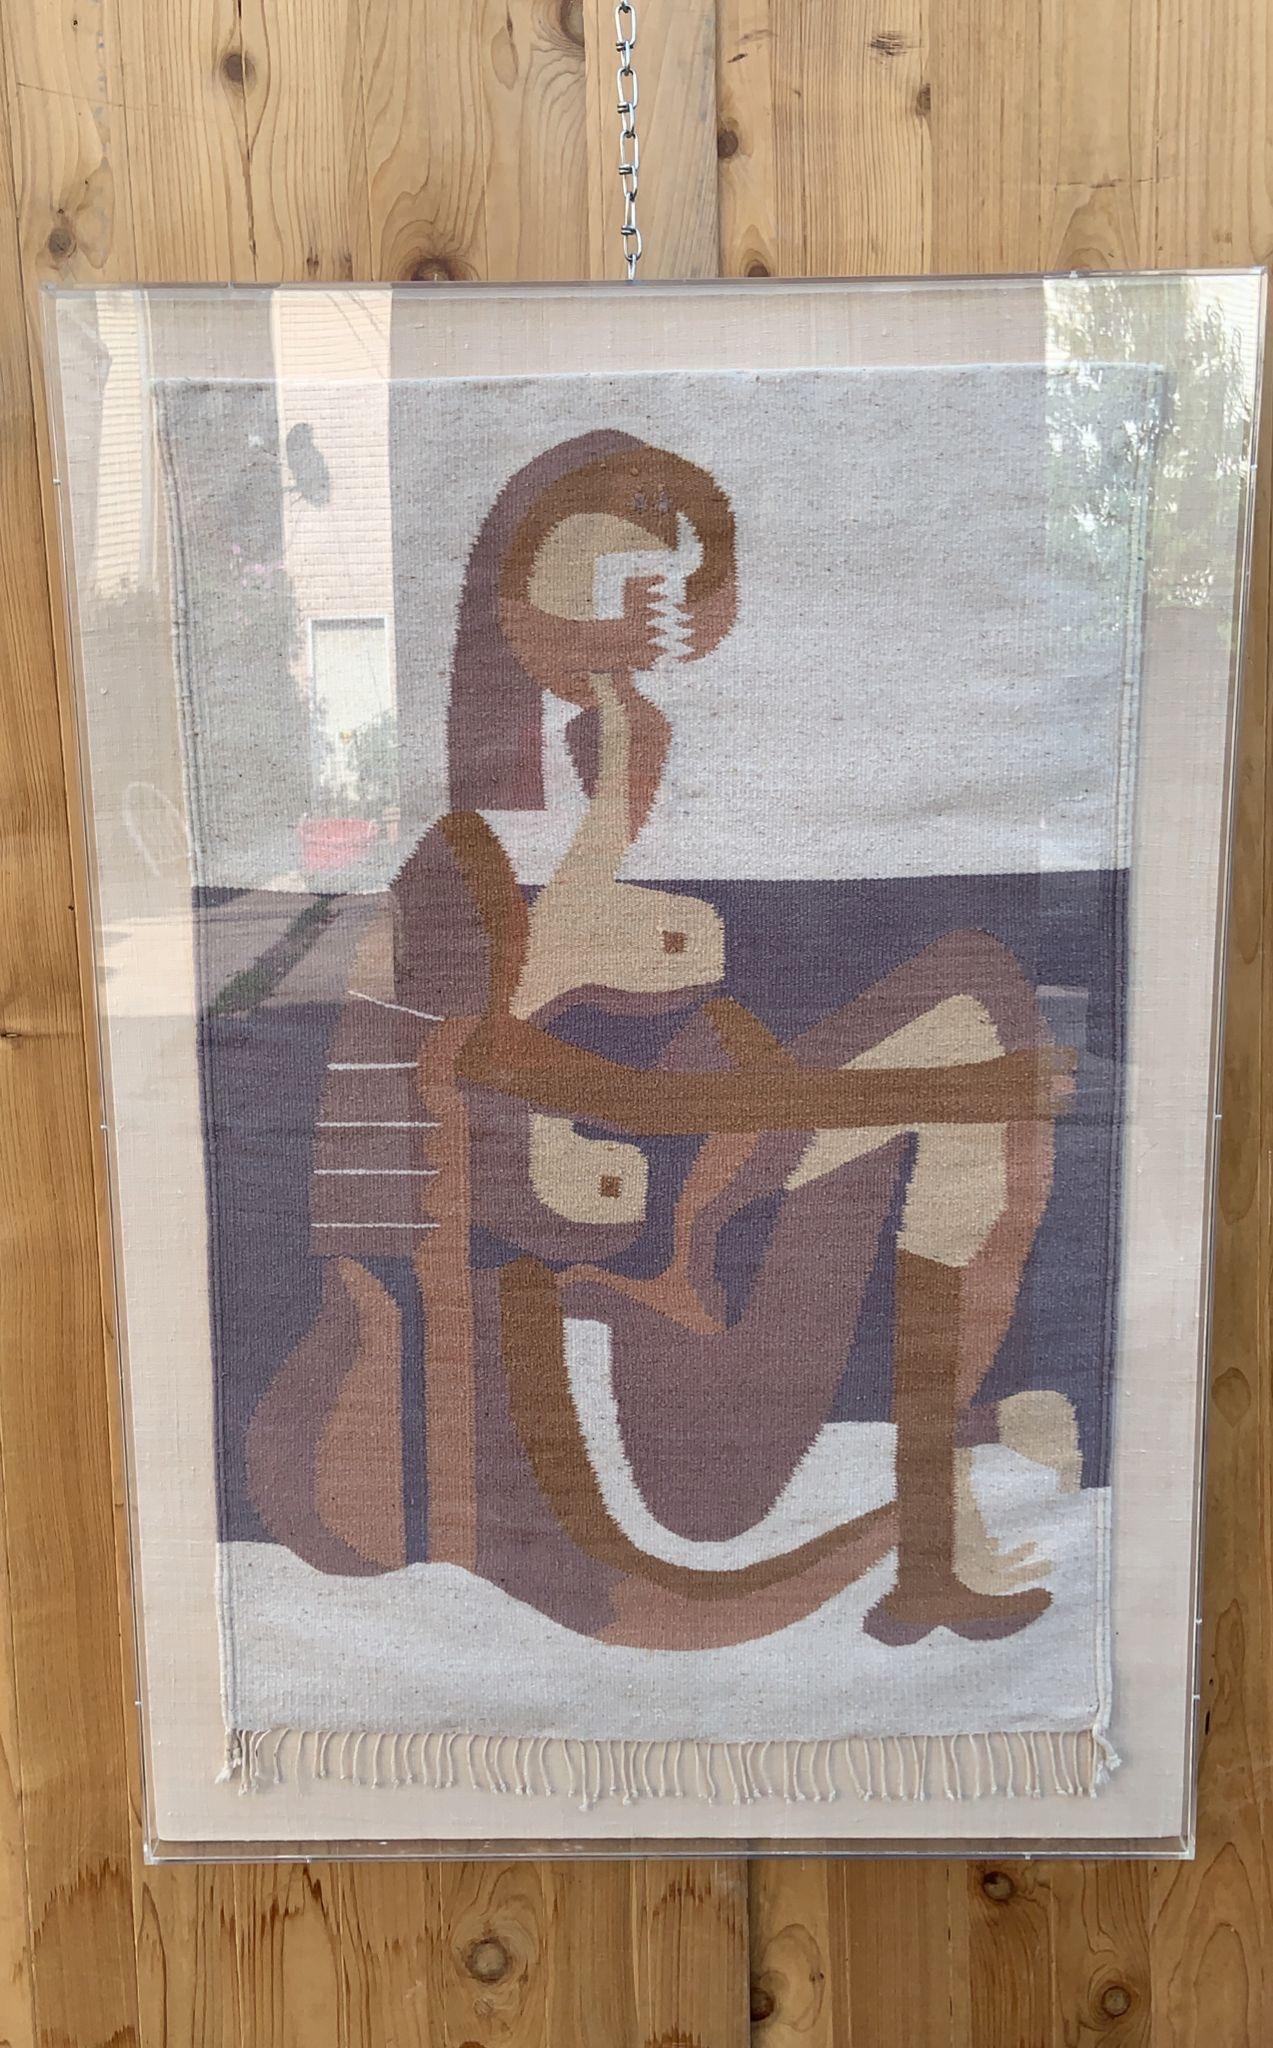 Vintage Boho Hand Woven Pablo Picasso's Seated Bather Wall Hanging Tapestry in Acrylic Case 

This is a beautiful vintage boho vibe handmade woven tapestry that has been professionally places in an acrylic case for a beautiful wall display.  The